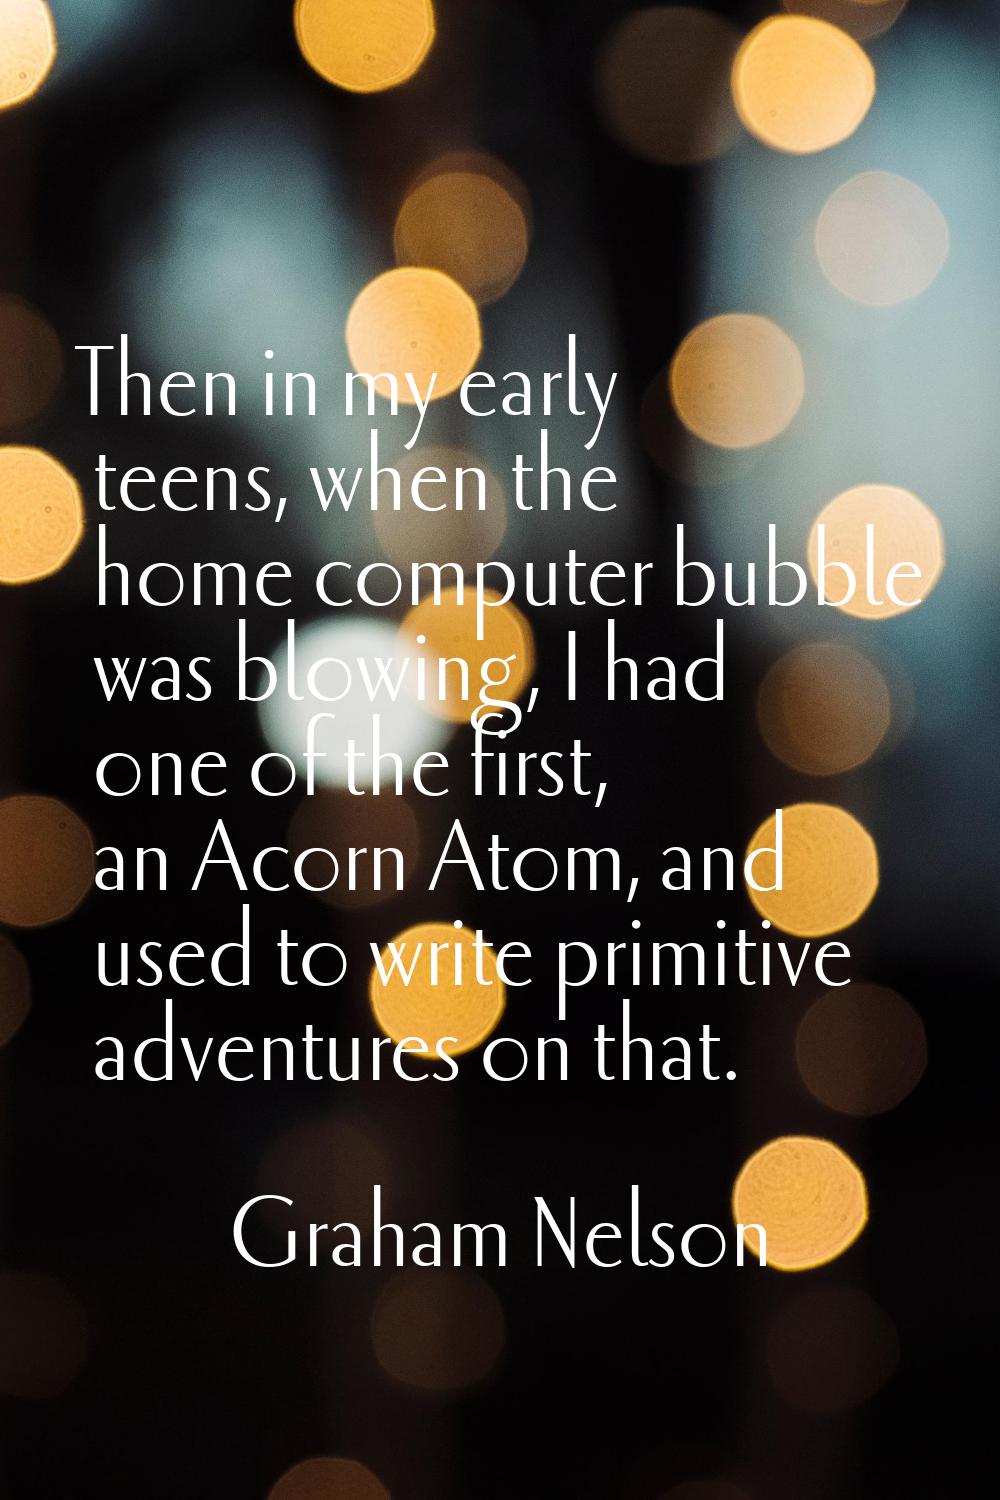 Then in my early teens, when the home computer bubble was blowing, I had one of the first, an Acorn